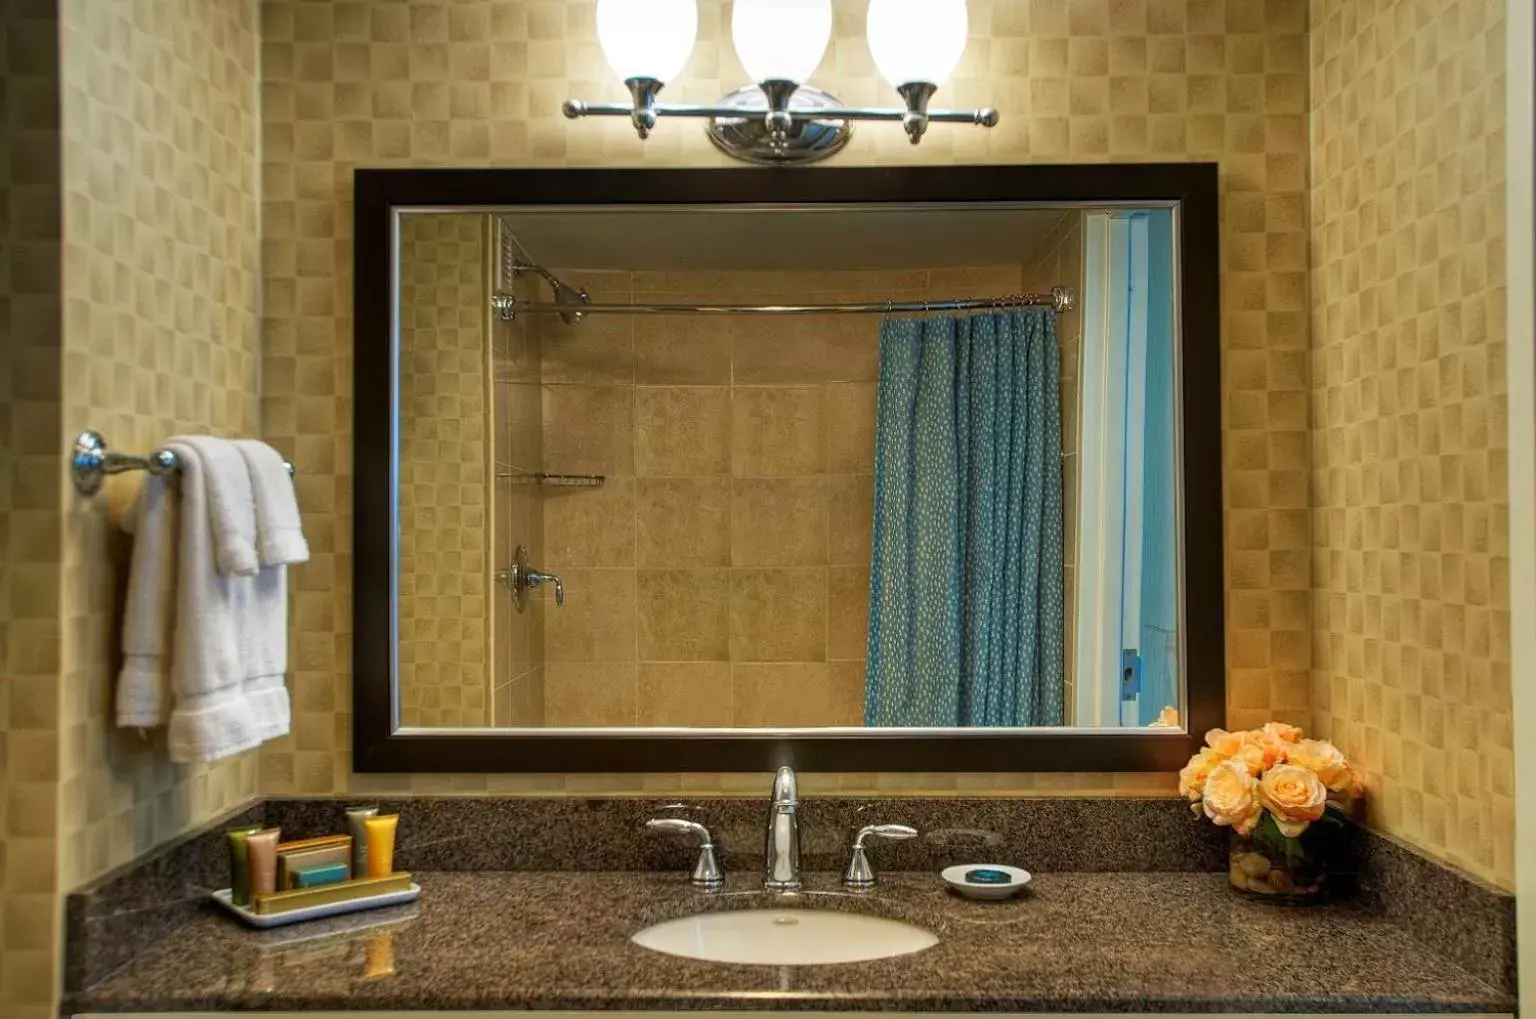 Bathroom in Heldrich Hotel and Conference Center